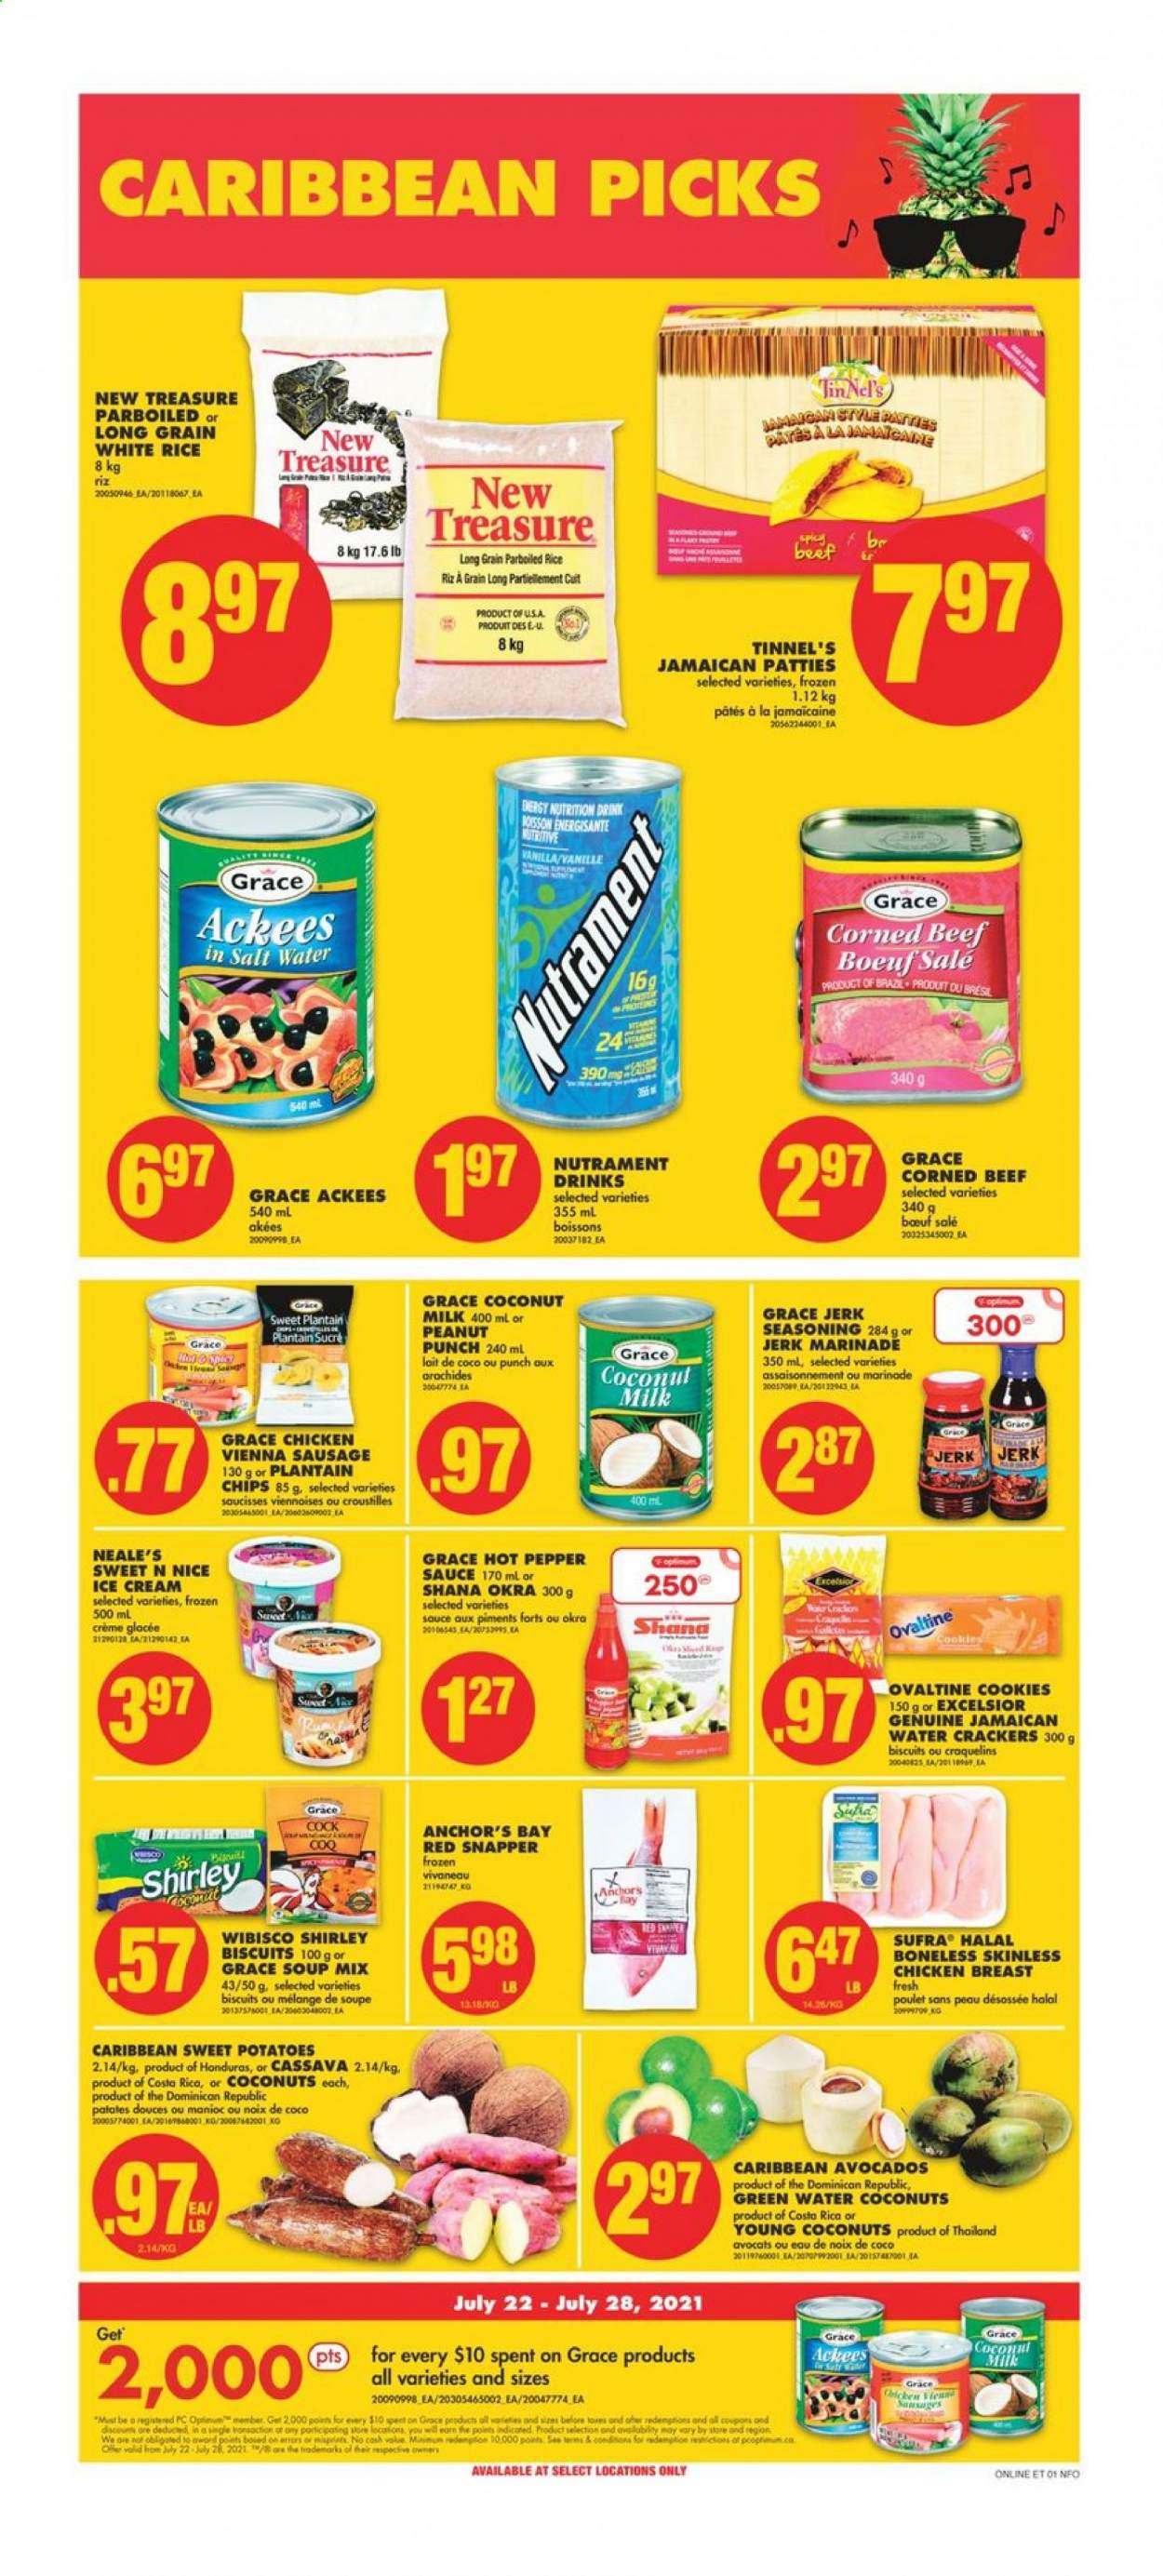 thumbnail - No Frills Flyer - July 22, 2021 - July 28, 2021 - Sales products - sweet potato, potatoes, okra, soup mix, cassava, avocado, red snapper, soup, sauce, ready meal, chicken breasts, sausage, vienna sausage, corned beef, plant-based milk, ice cream, crackers, biscuit, coconut milk, canned fruit, white rice, parboiled rice, spice, marinade, coconut, nutritional supplement. Page 10.